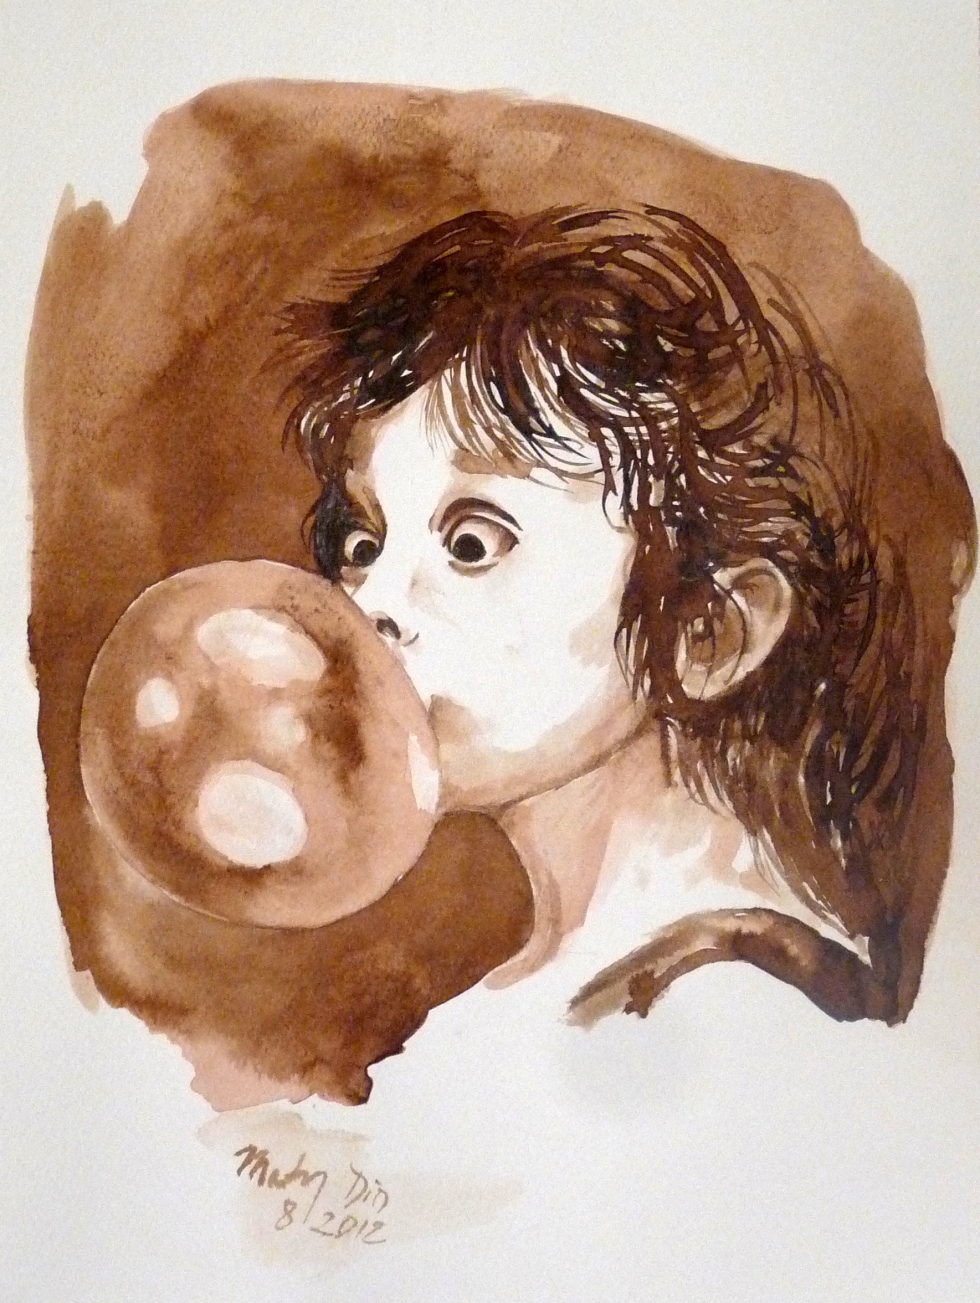 Blowing Hard, Homemade Walnut Shell Ink on Paper by Maty Dio